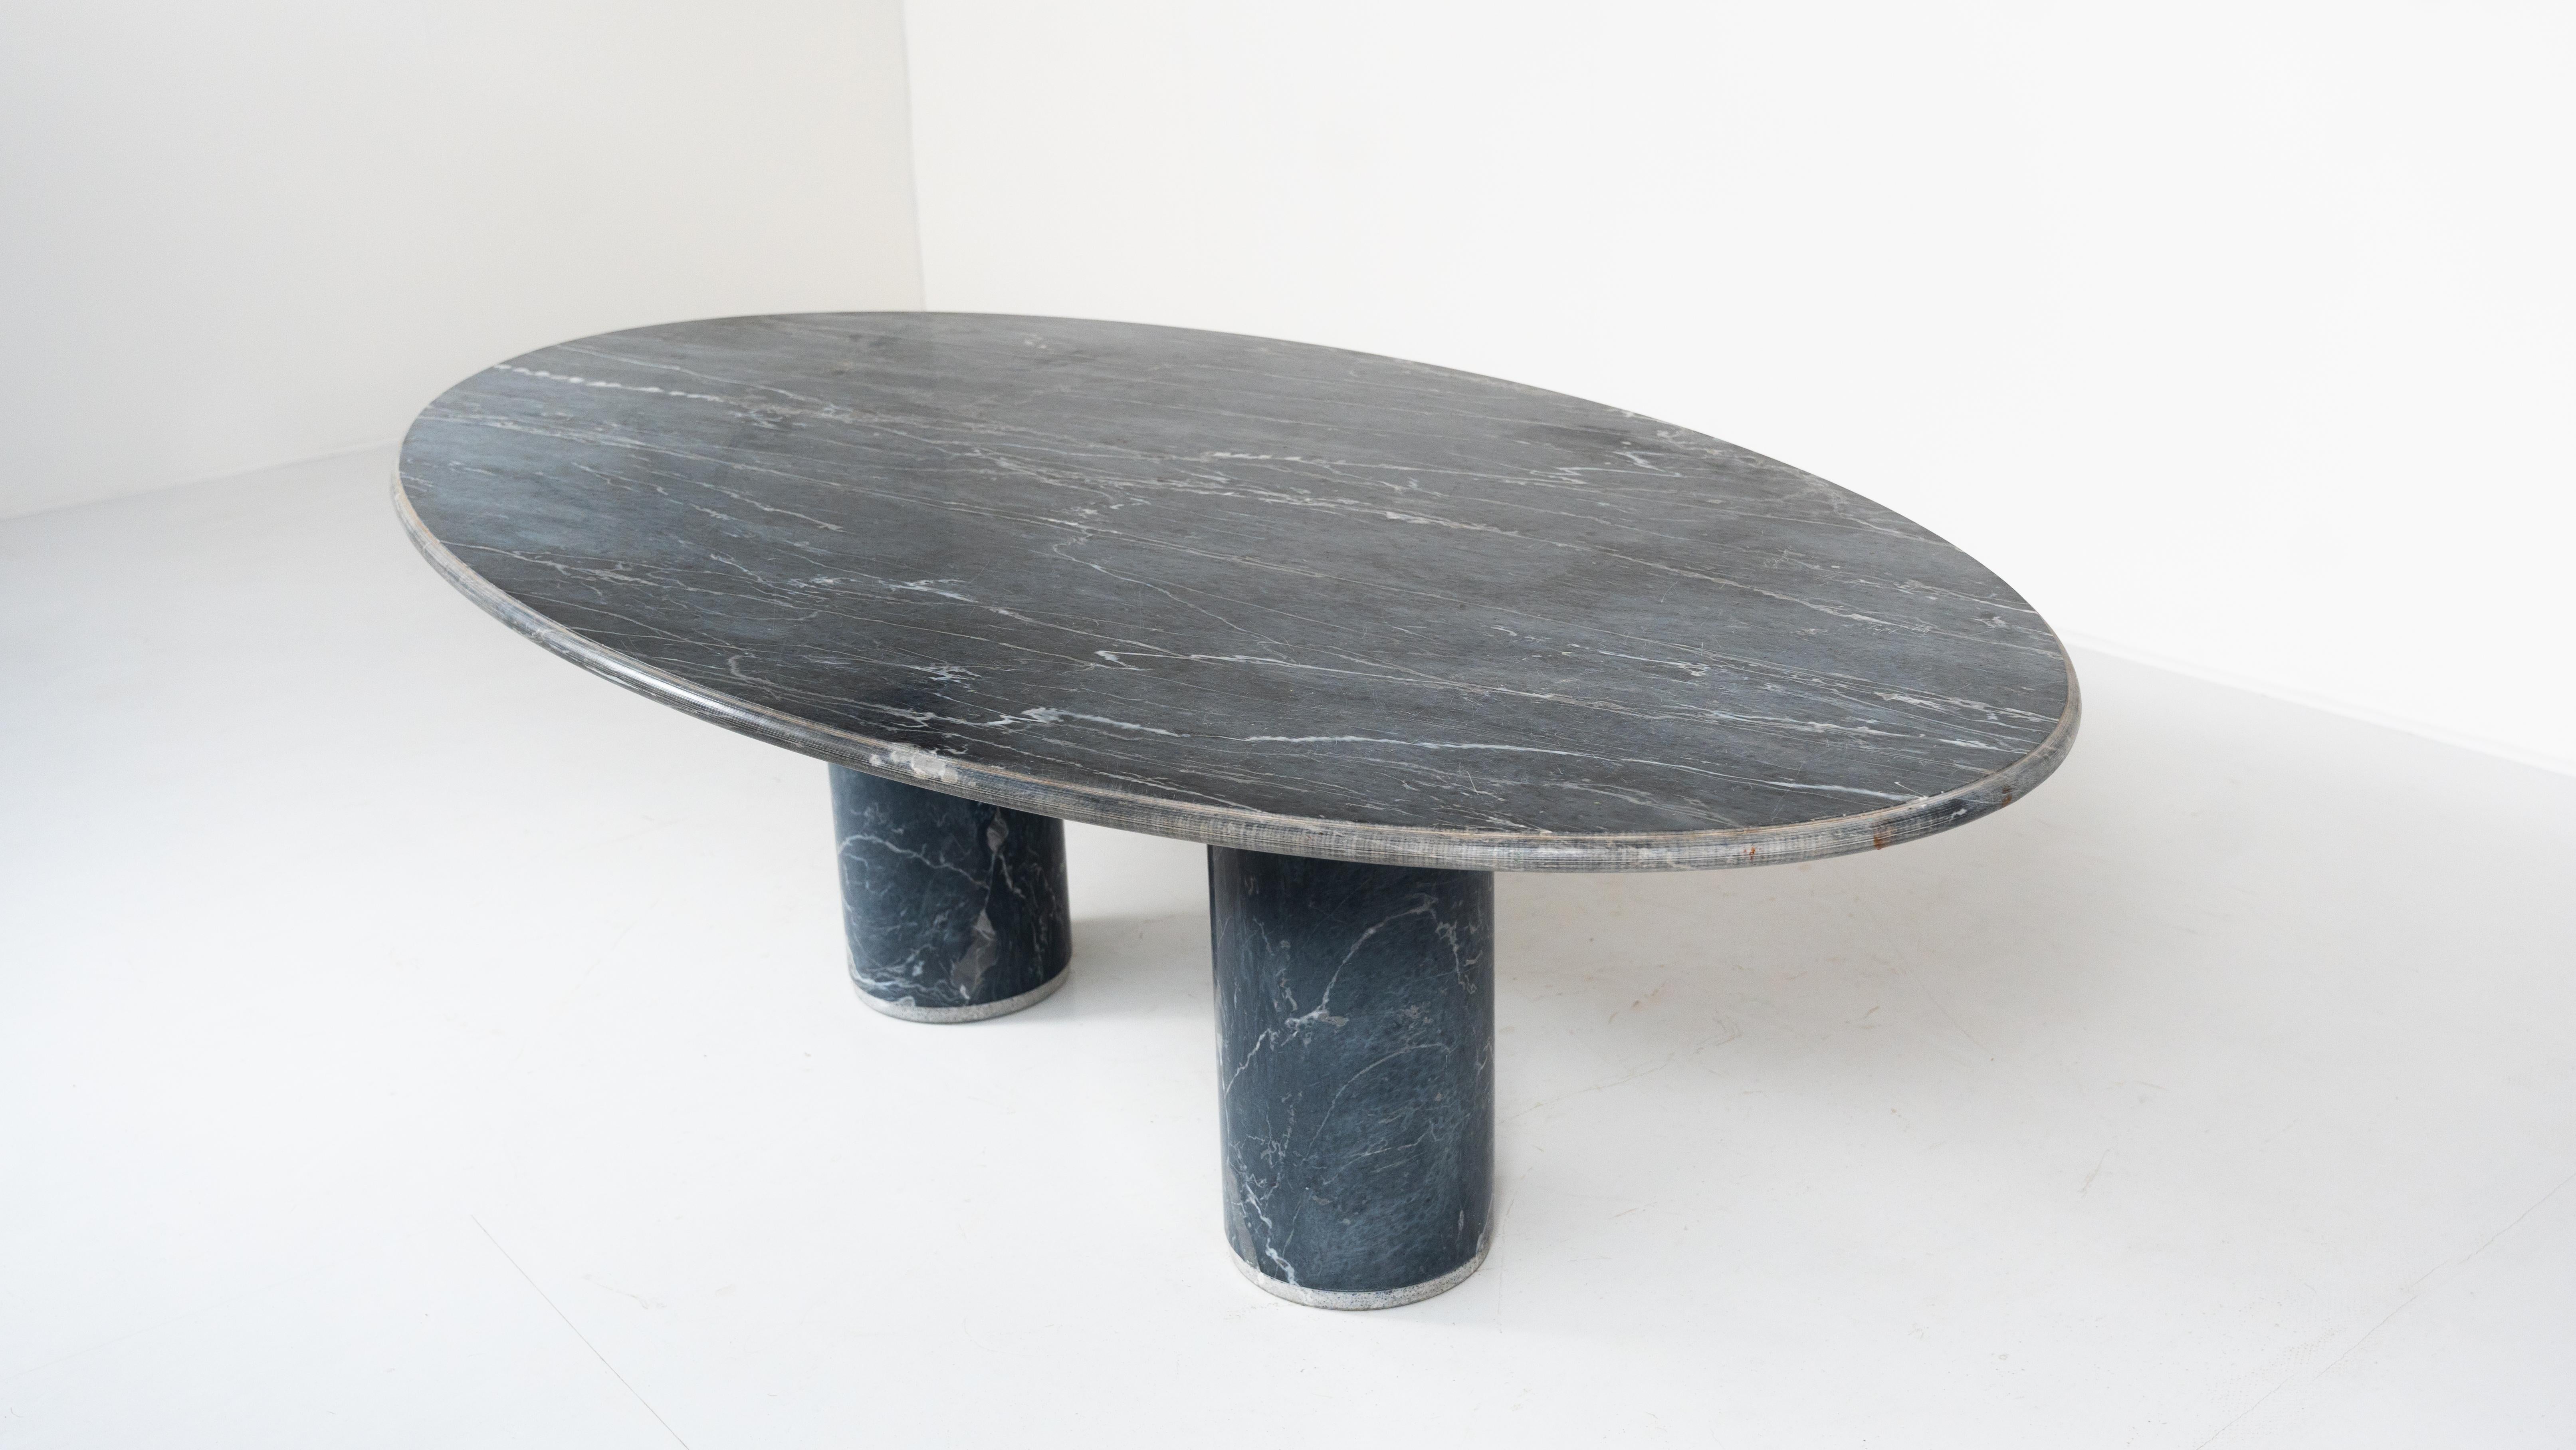 Italian Ovale del Giardiniere Table by Achille Castiglioni for Upgroup, Marble, 1980s For Sale